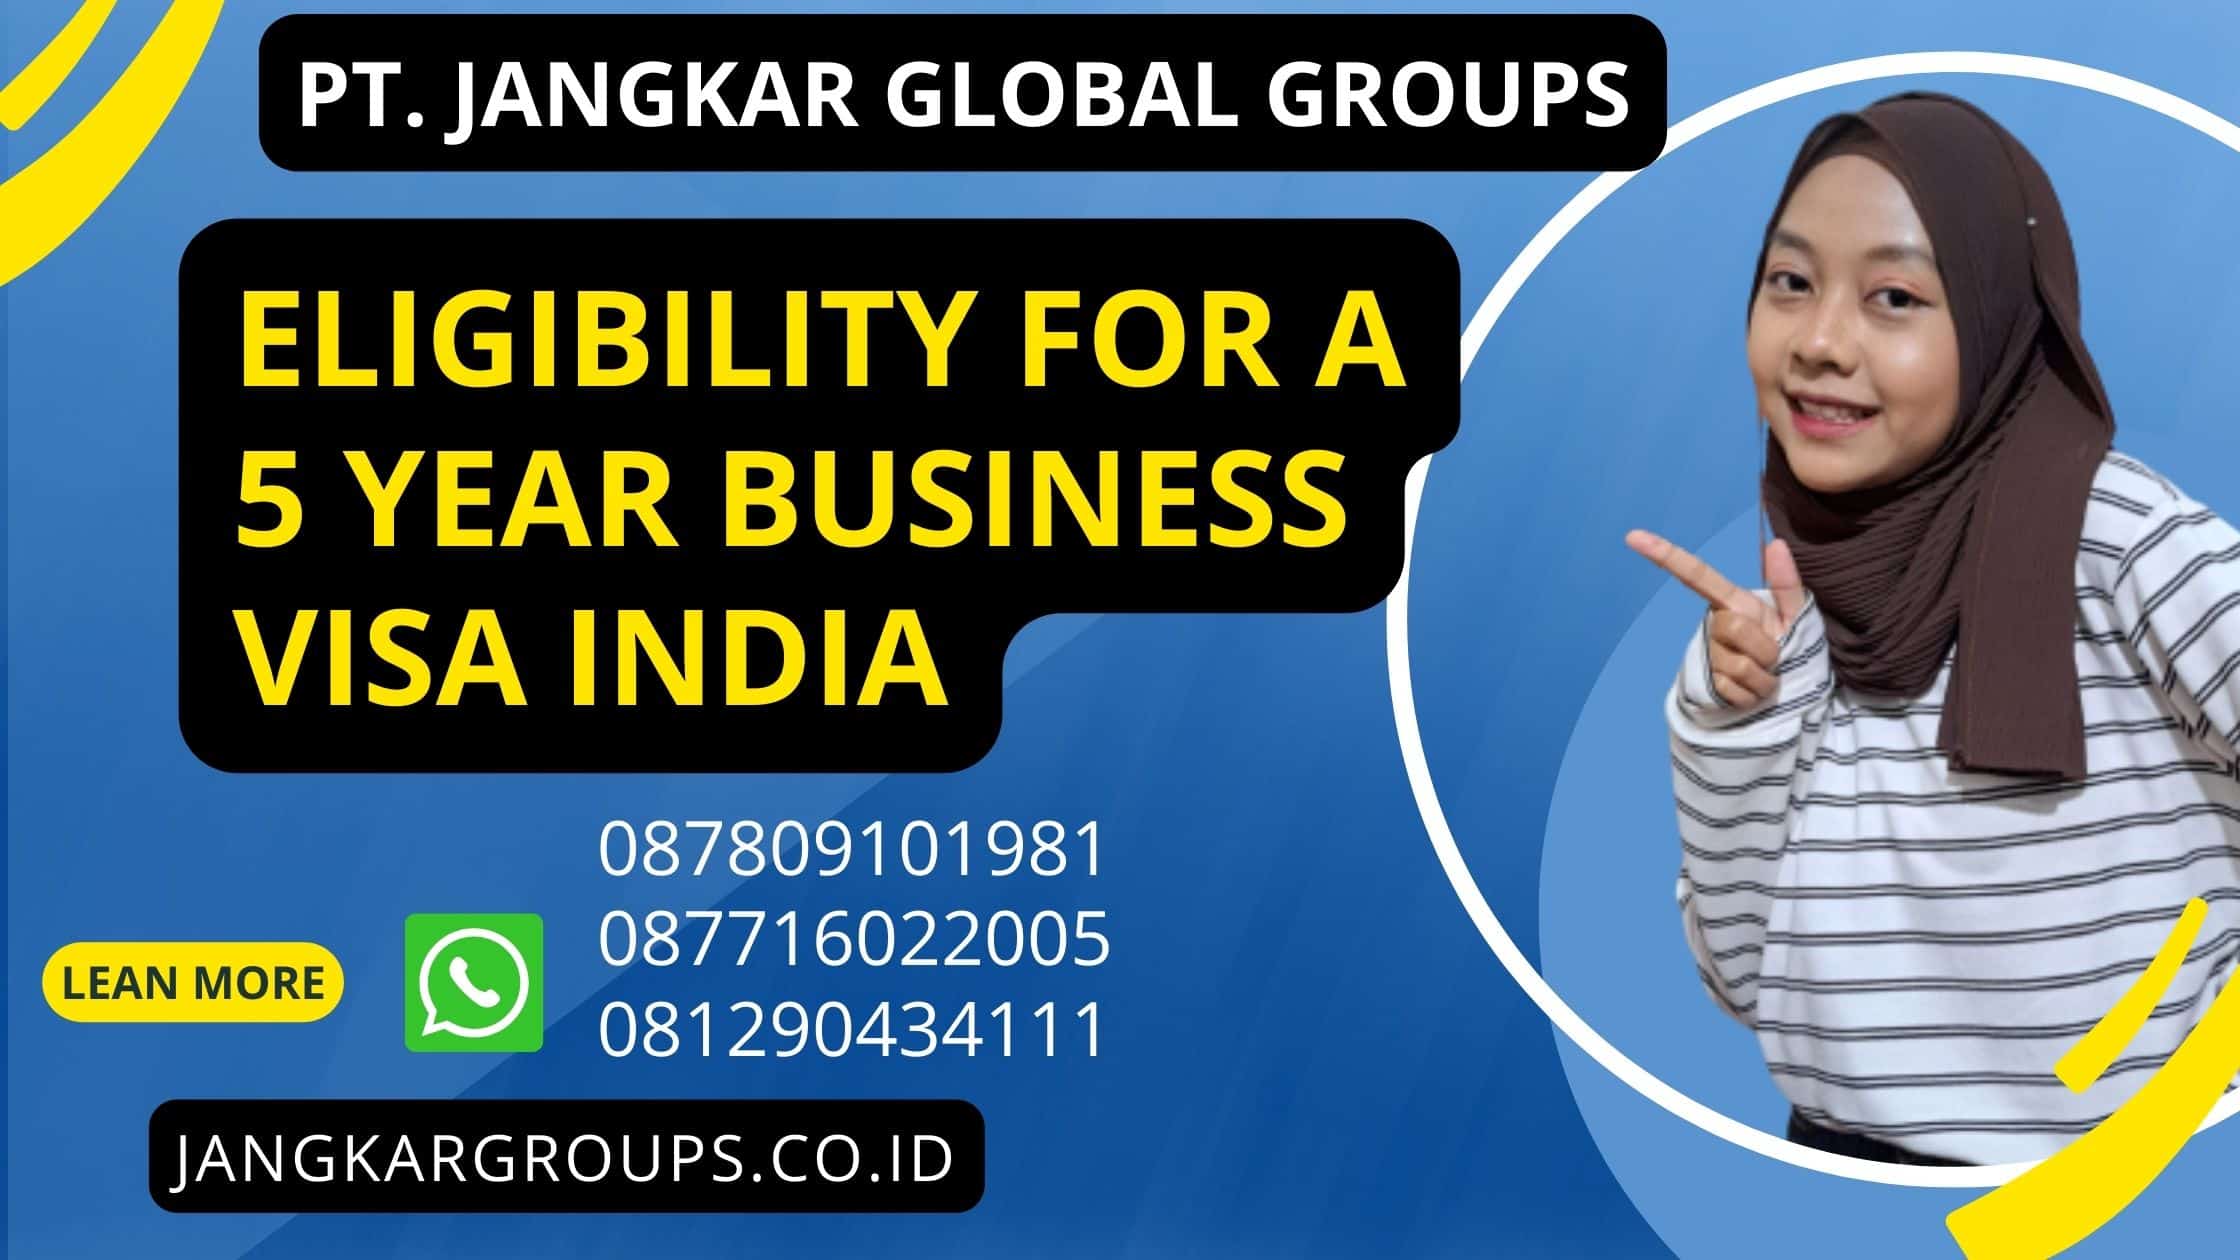 Eligibility for a 5 Year Business Visa India